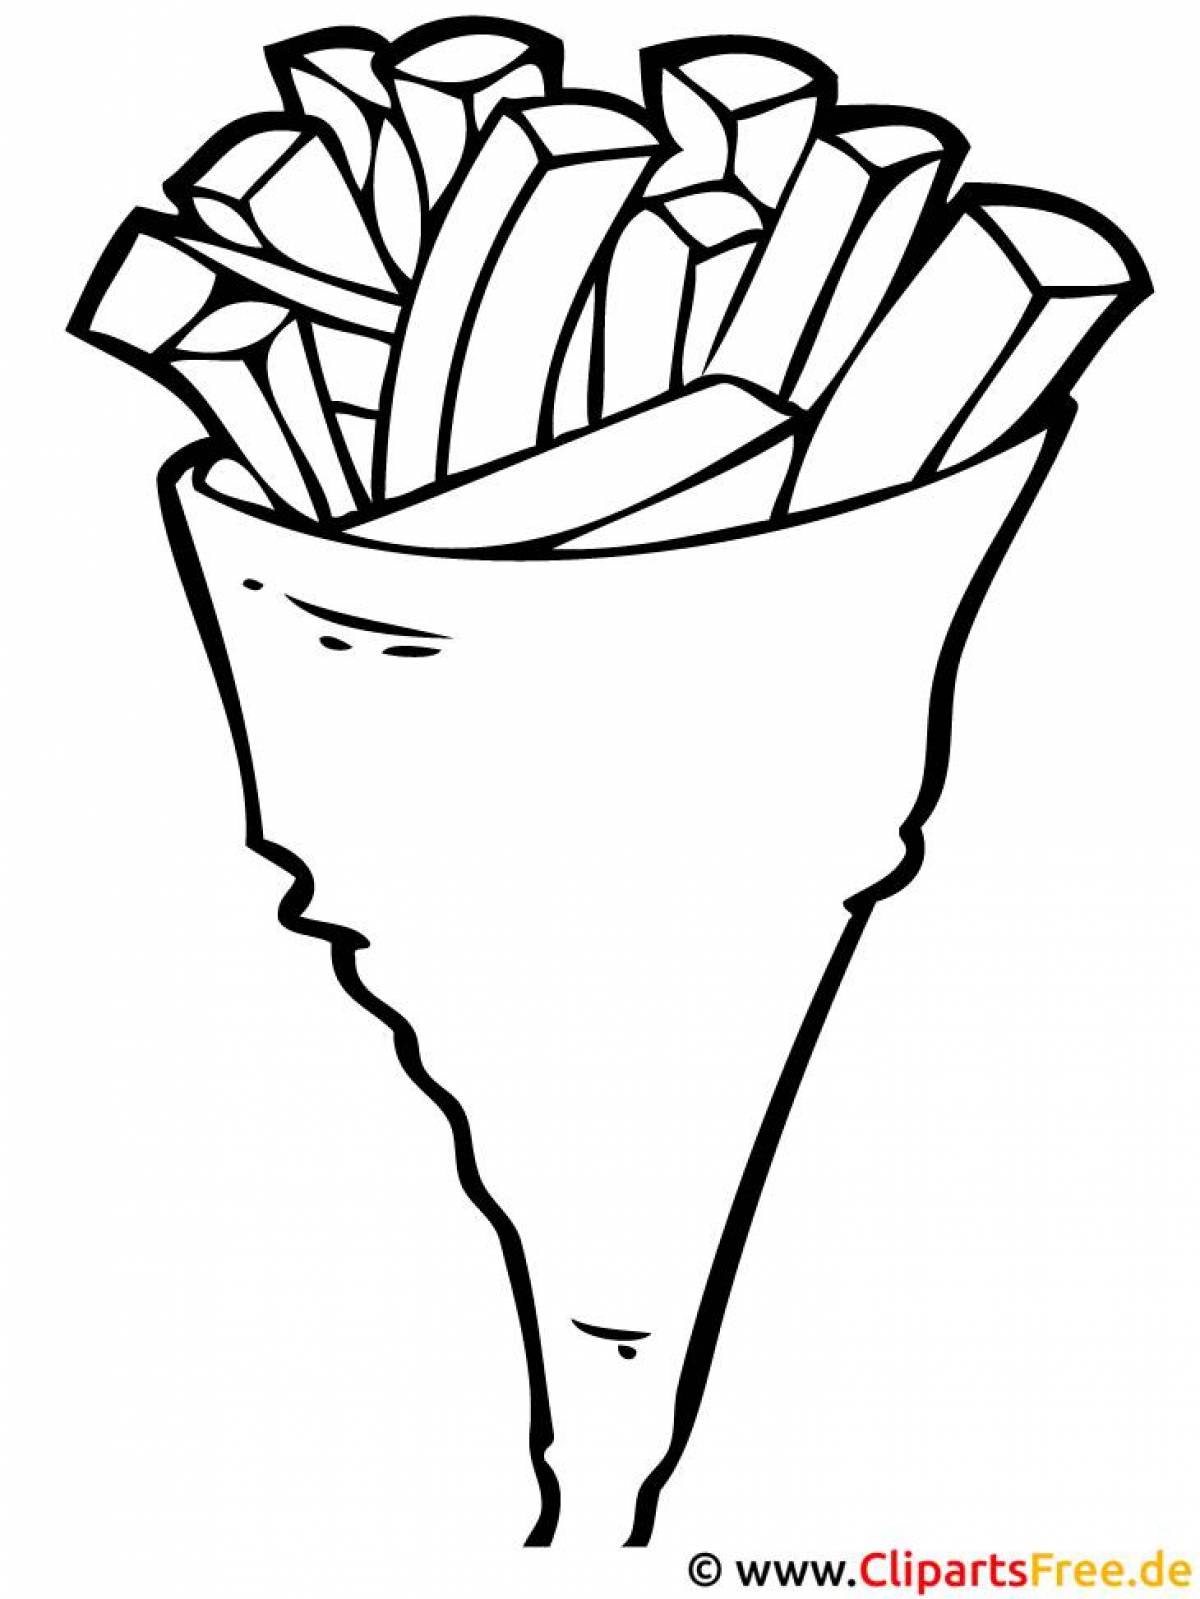 Chip coloring page